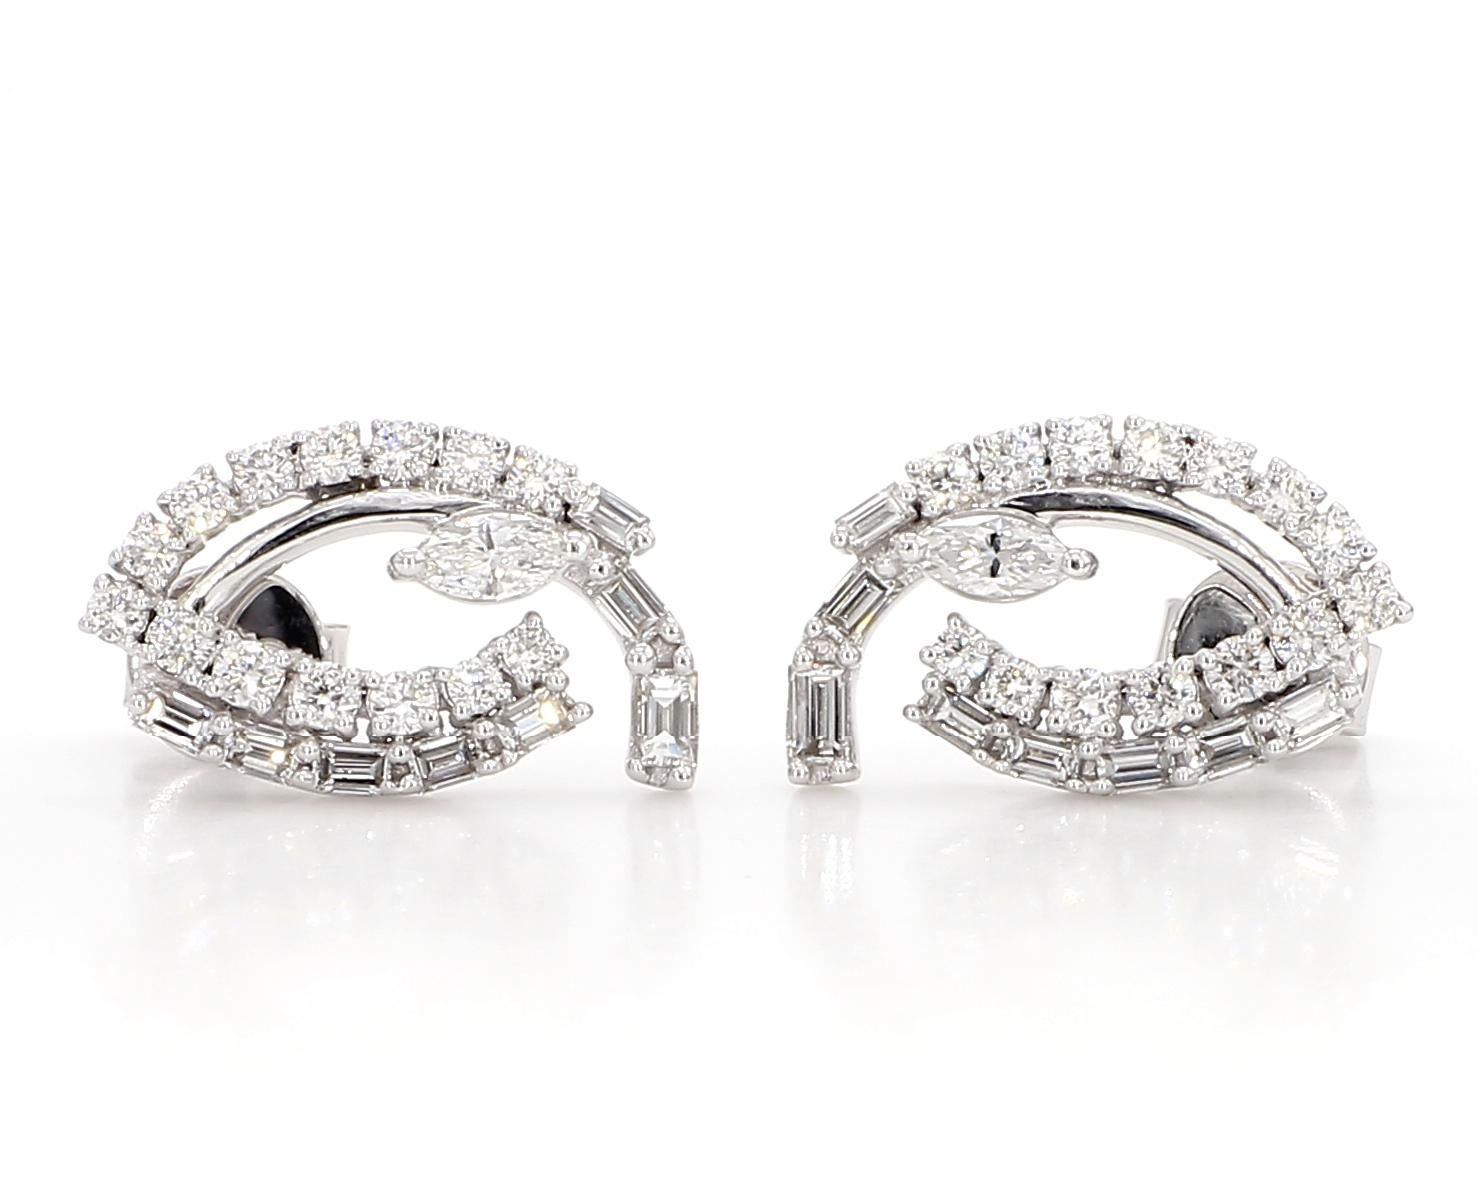 RareGemWorld's classic diamond earrings. Mounted in a beautiful 18K White Gold setting with natural marquise cut white diamond and natural round cut white diamonds. These earrings are guaranteed to impress and enhance your personal